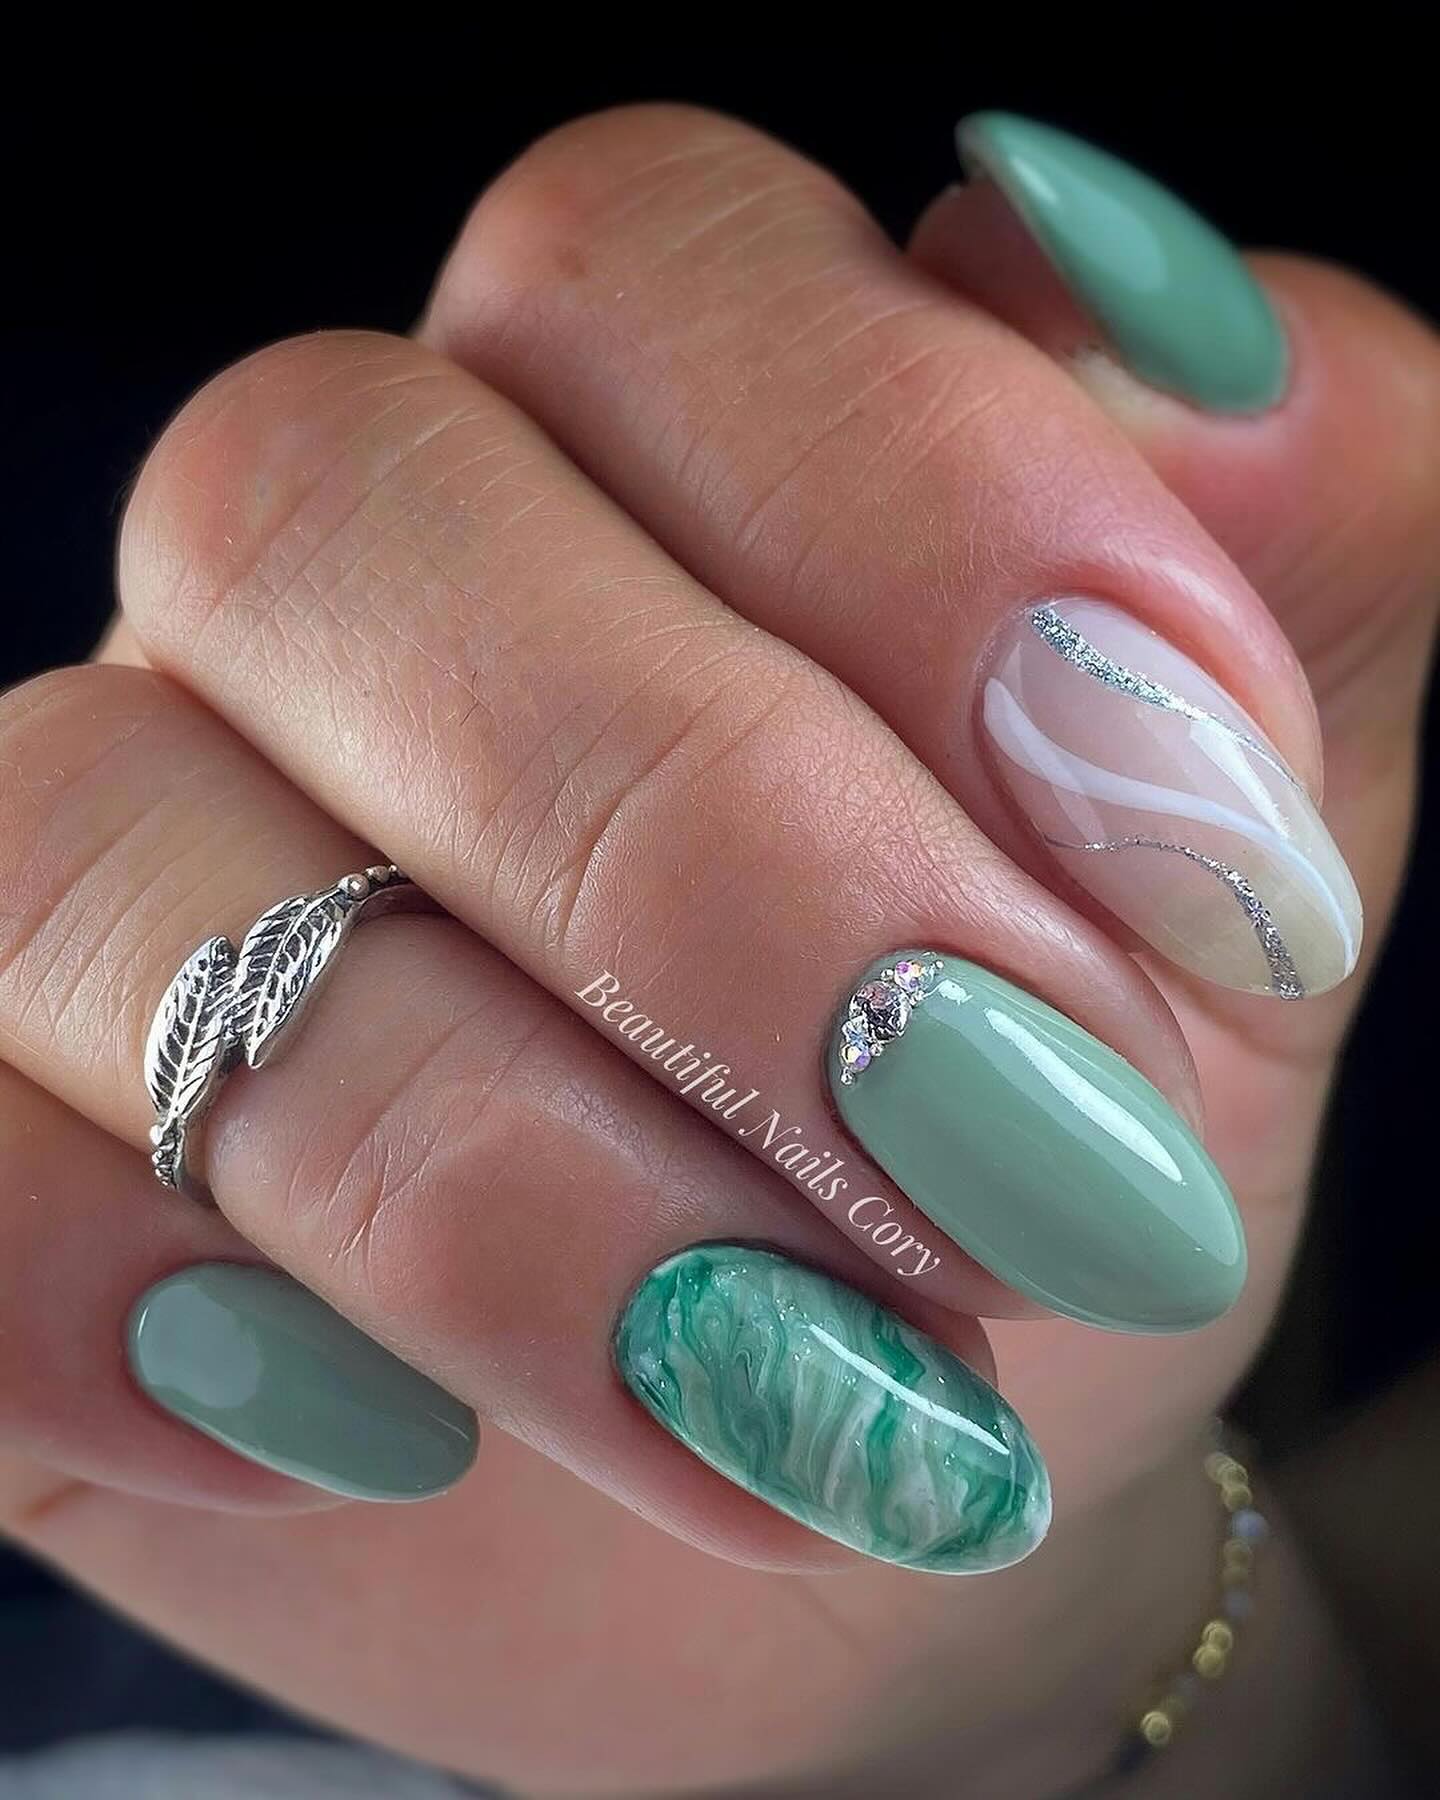 100 Of The Best Spring Inspired Nail Designs images 95